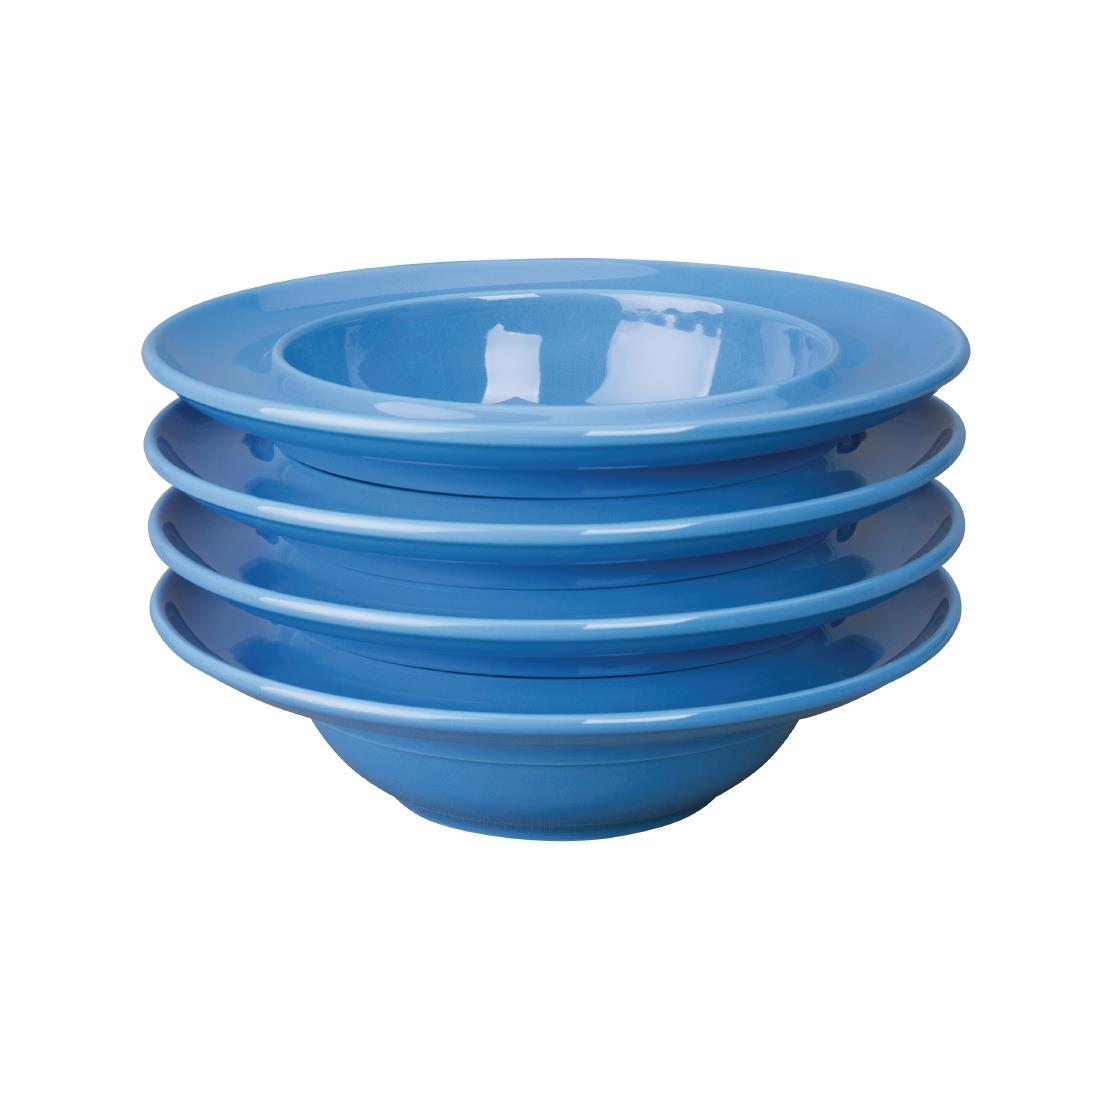 Olympia Kristallon HeritageRaised Rim Bowls Blue 205mm (Pack of 4) - DW702  - 6